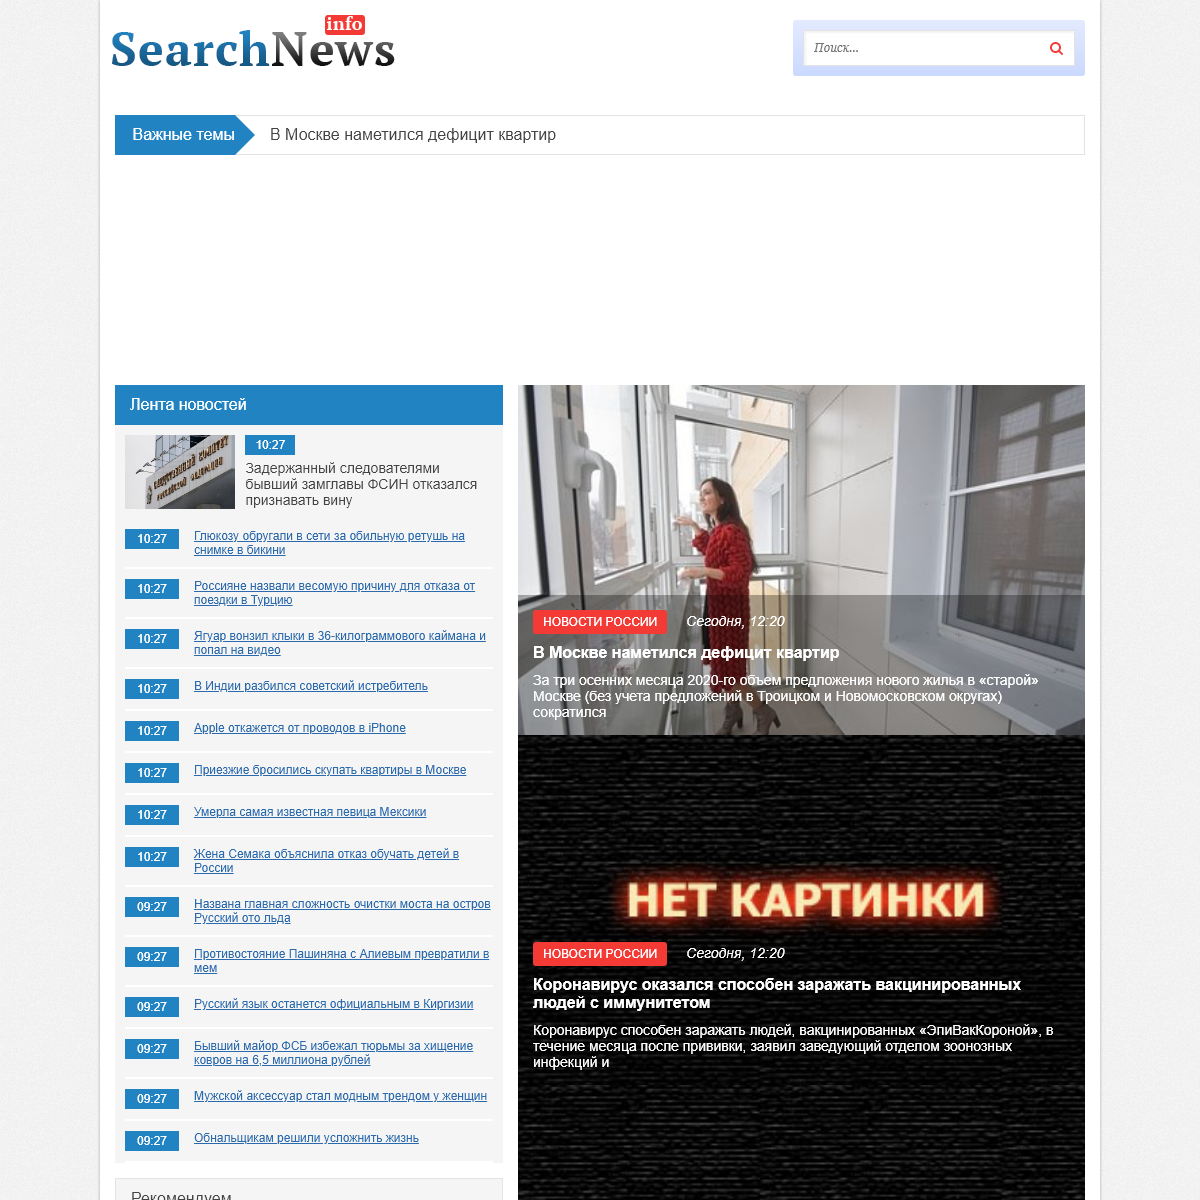 A complete backup of searchnews.info